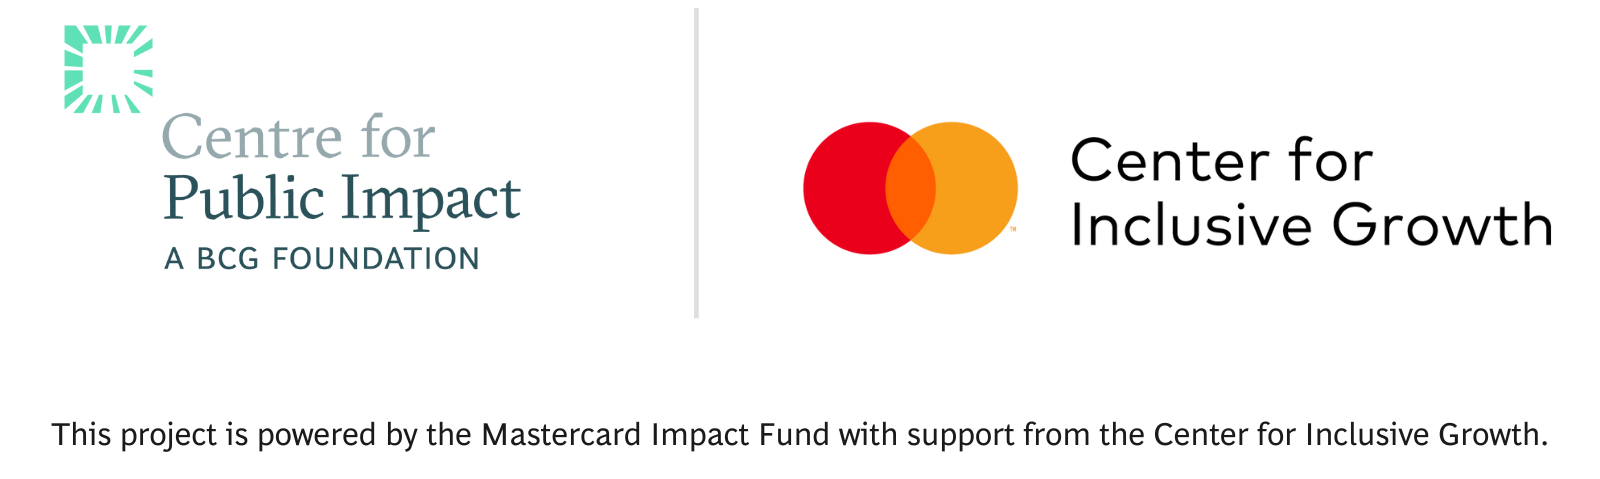 CPI and Mastercard Center for Inclusive Growth logos with disclaimer This project is powered by the Mastercard Impact Fund with support from the Center for Inclusive Growth.